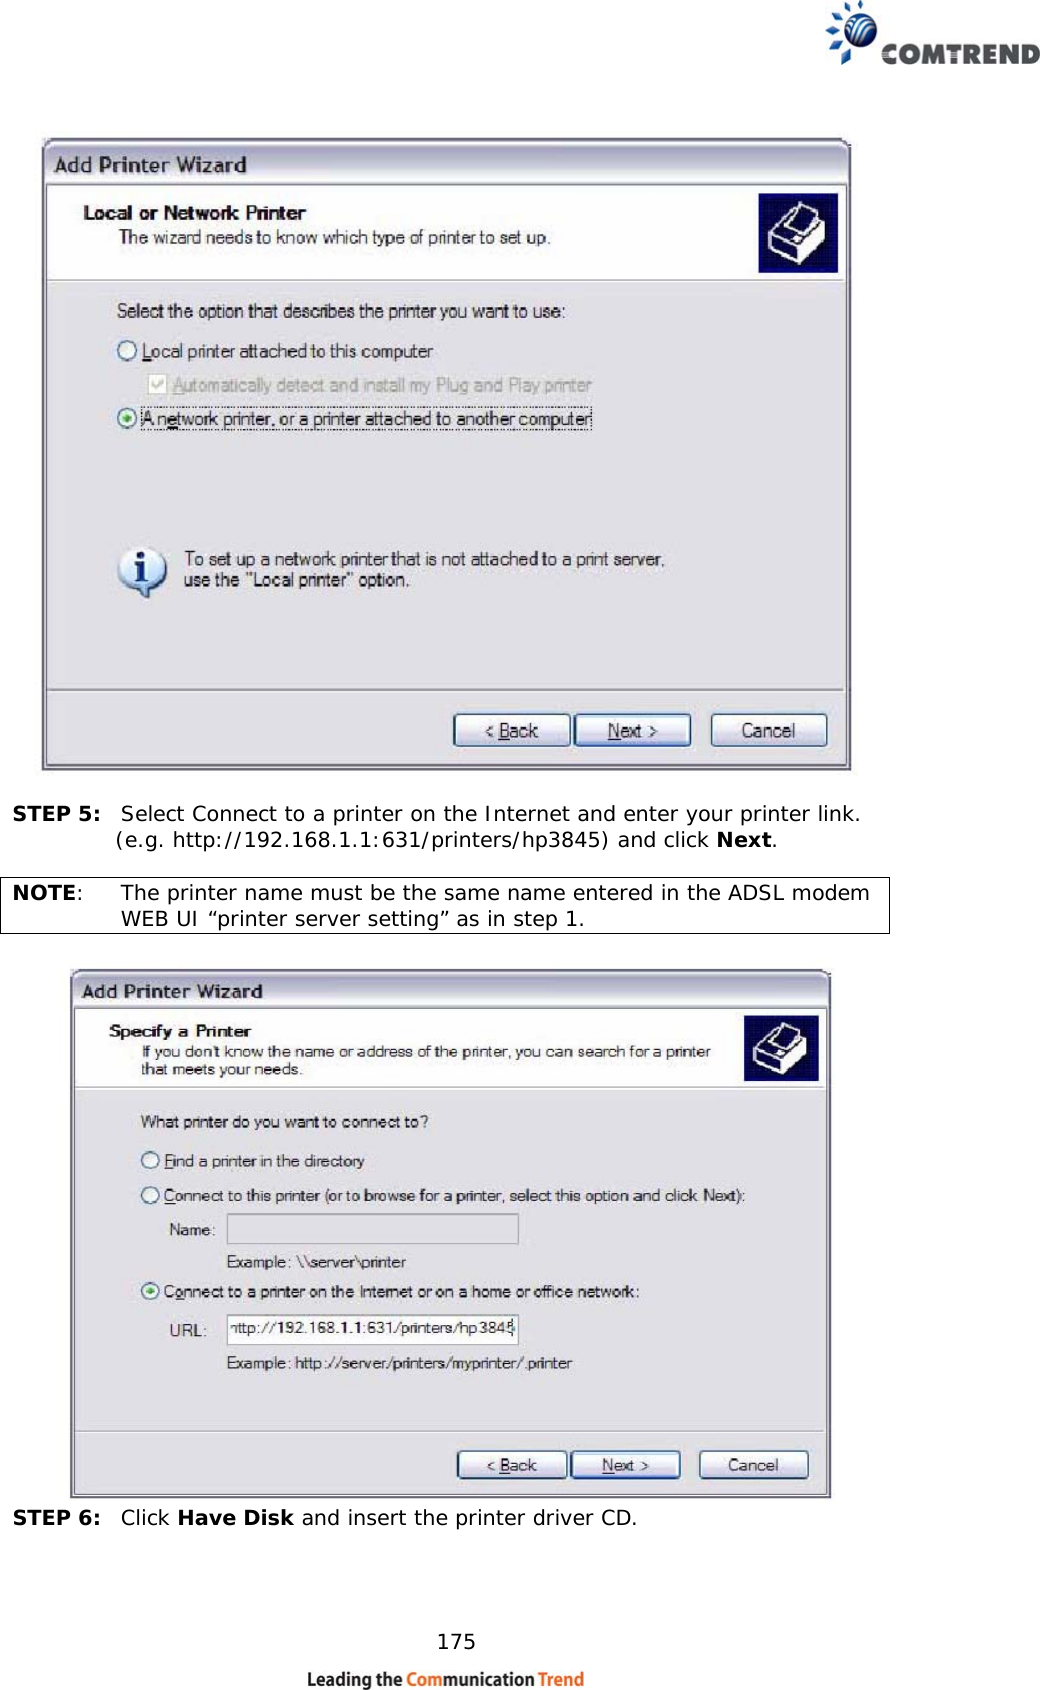    175   STEP 5:  Select Connect to a printer on the Internet and enter your printer link.   (e.g. http://192.168.1.1:631/printers/hp3845) and click Next.    NOTE:   The printer name must be the same name entered in the ADSL modem WEB UI “printer server setting” as in step 1.   STEP 6:  Click Have Disk and insert the printer driver CD.  